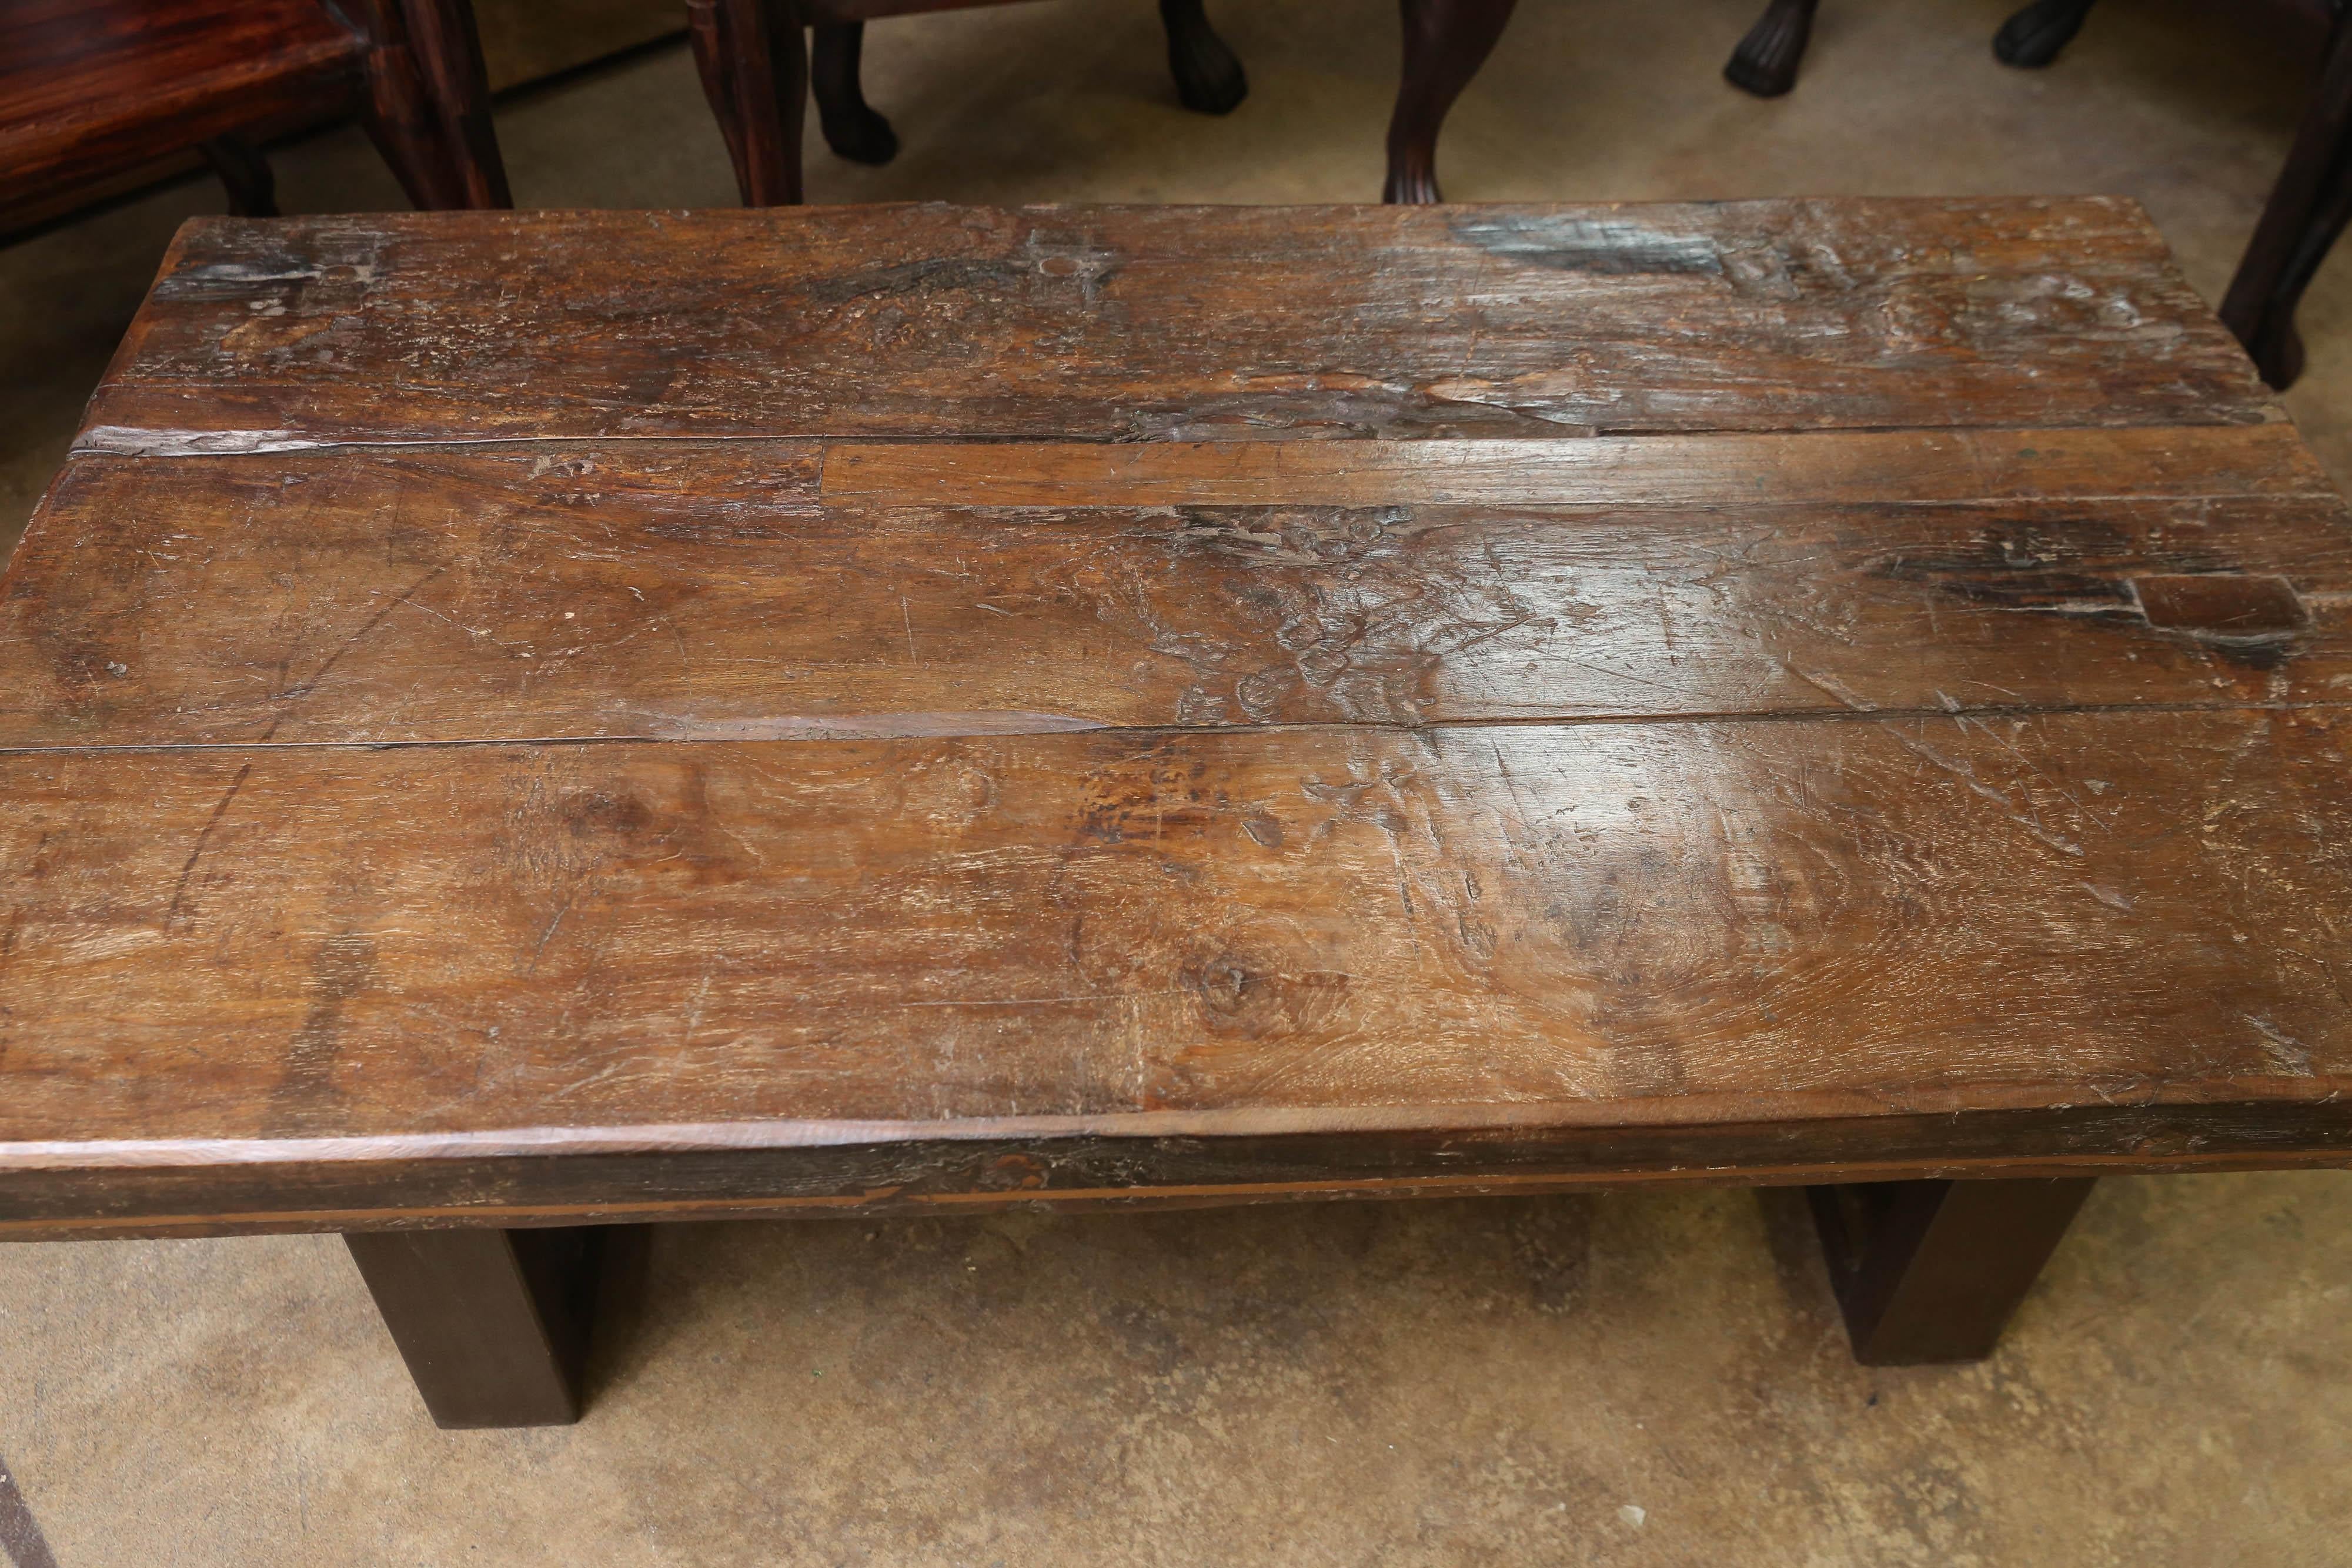 Just by looking at the top of the table one can discern the age of the table. The scars and the patina of the very thick top tell the good and hard times the table had gone through. Made at a time when good wood was plentiful. It has its grand and